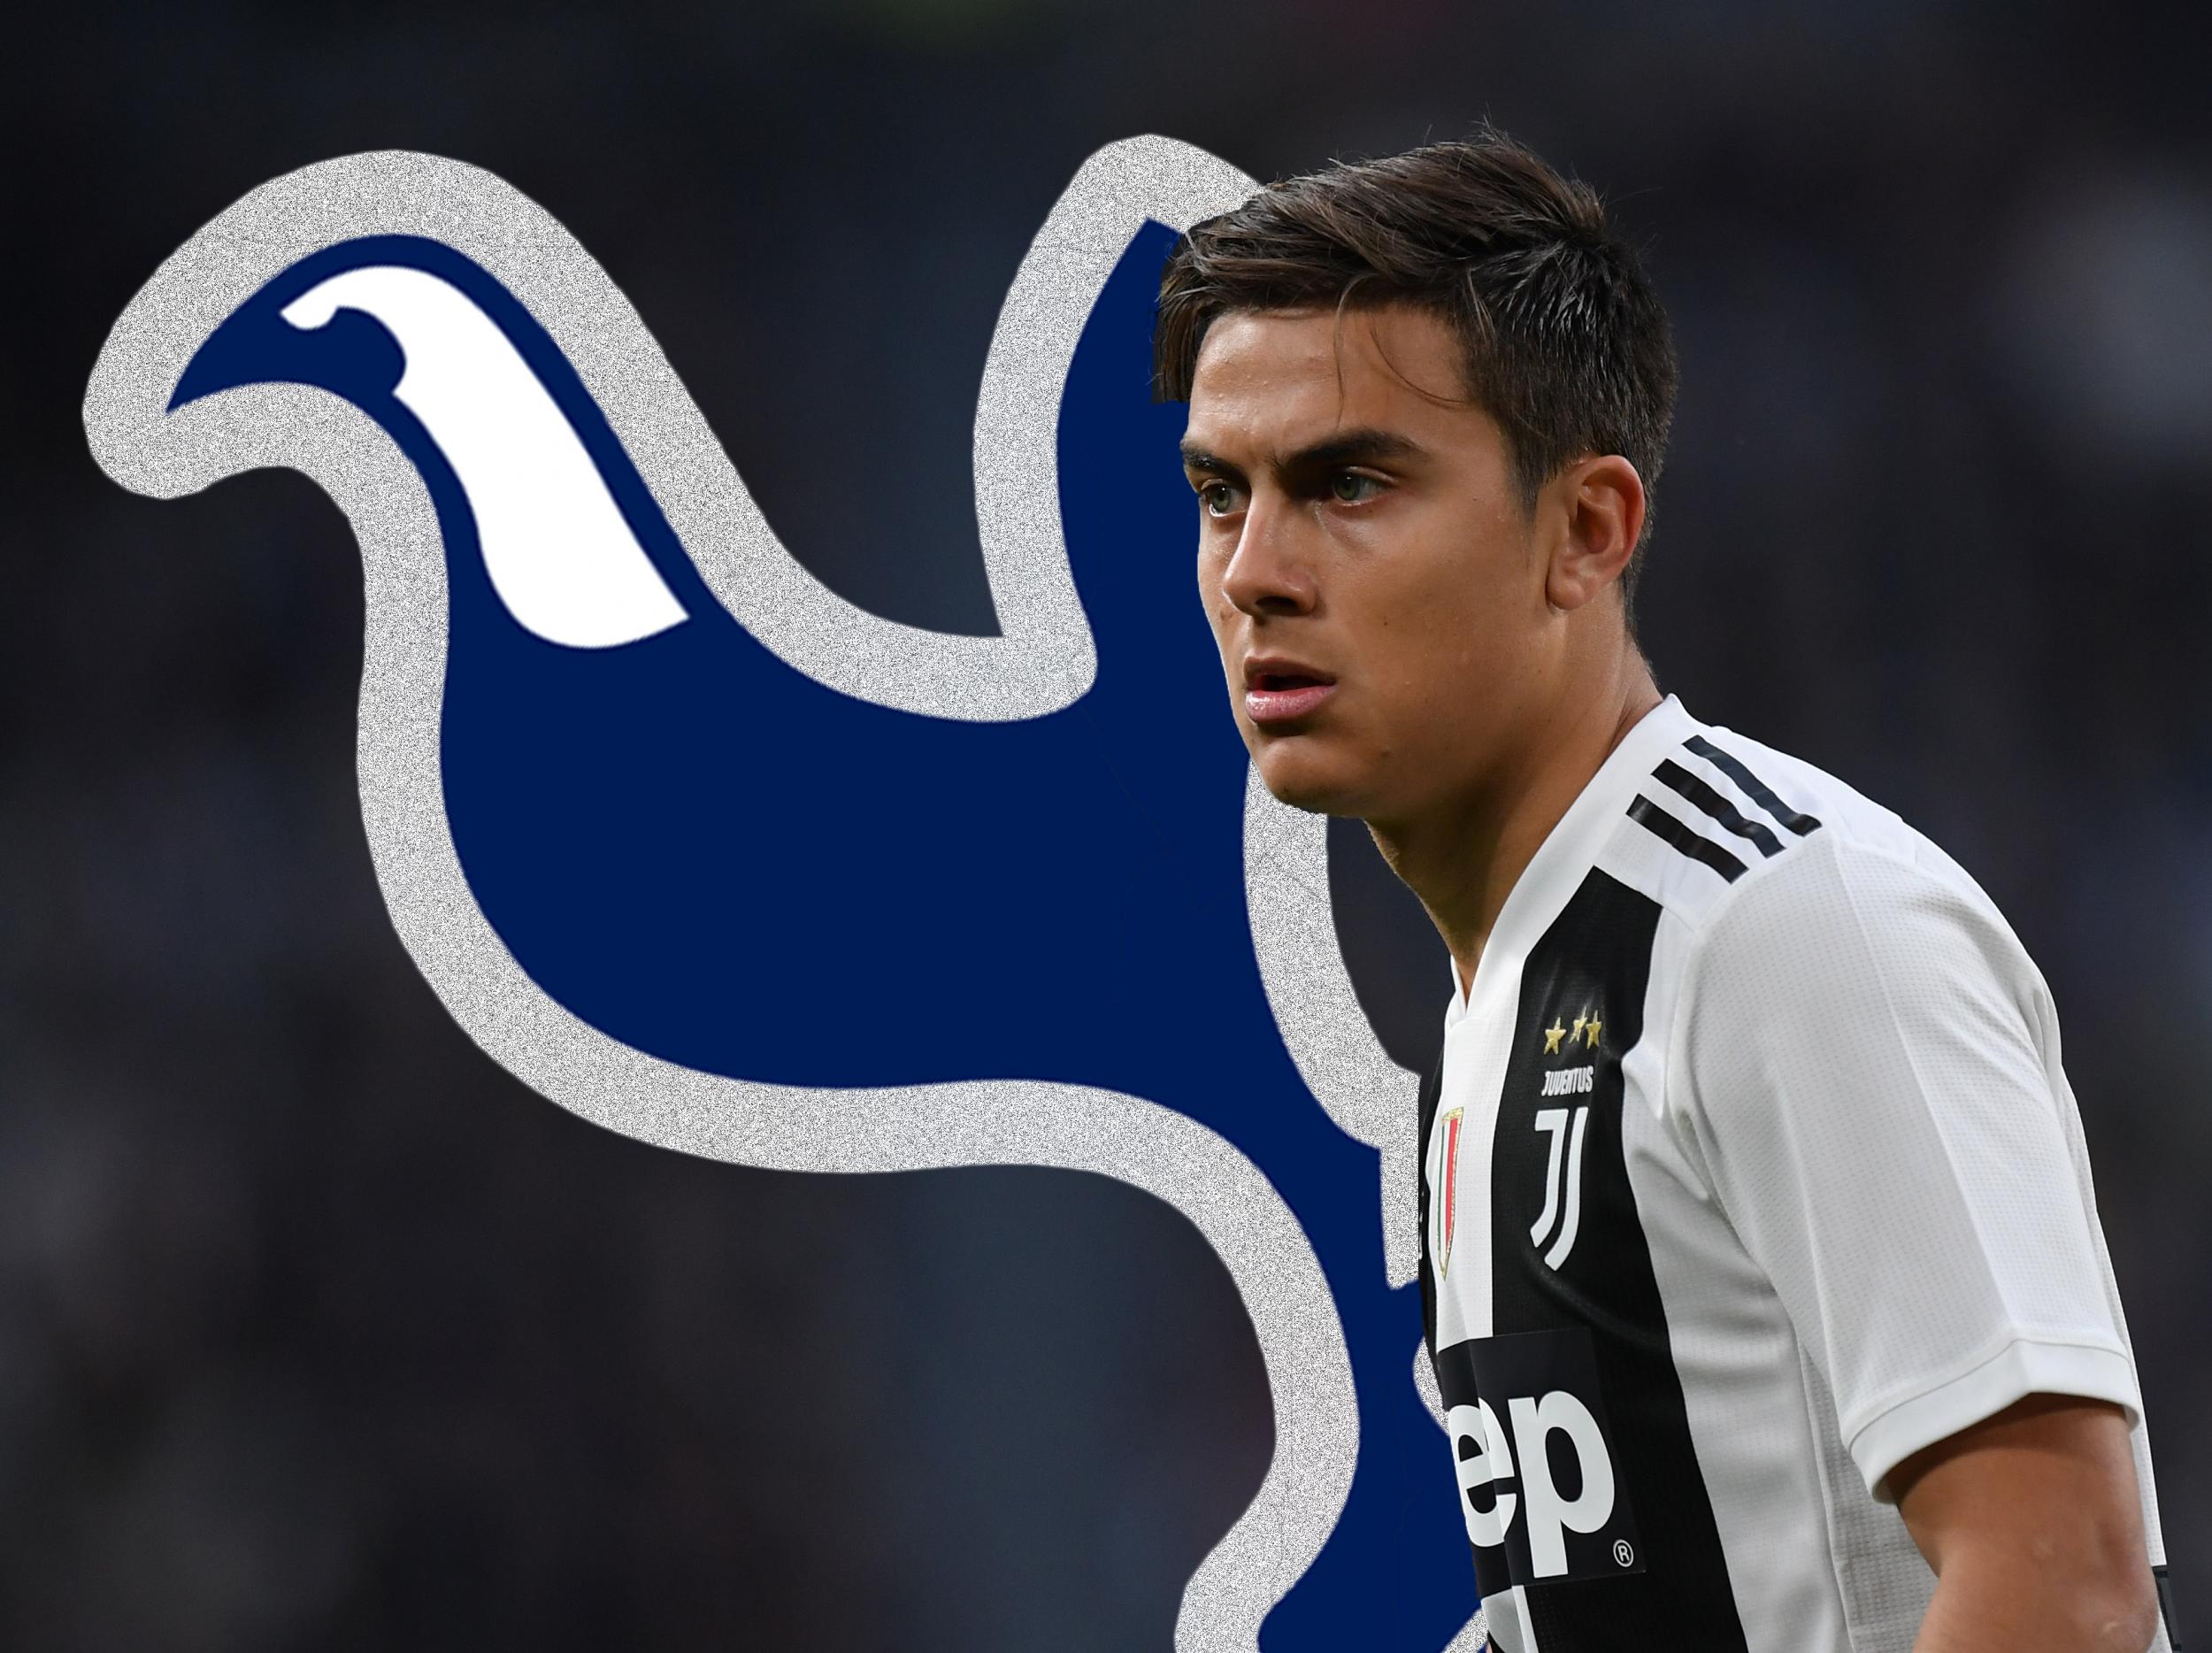 Tottenham transfer news Dybala agrees to join but image rights still a problem The Independent The Independent